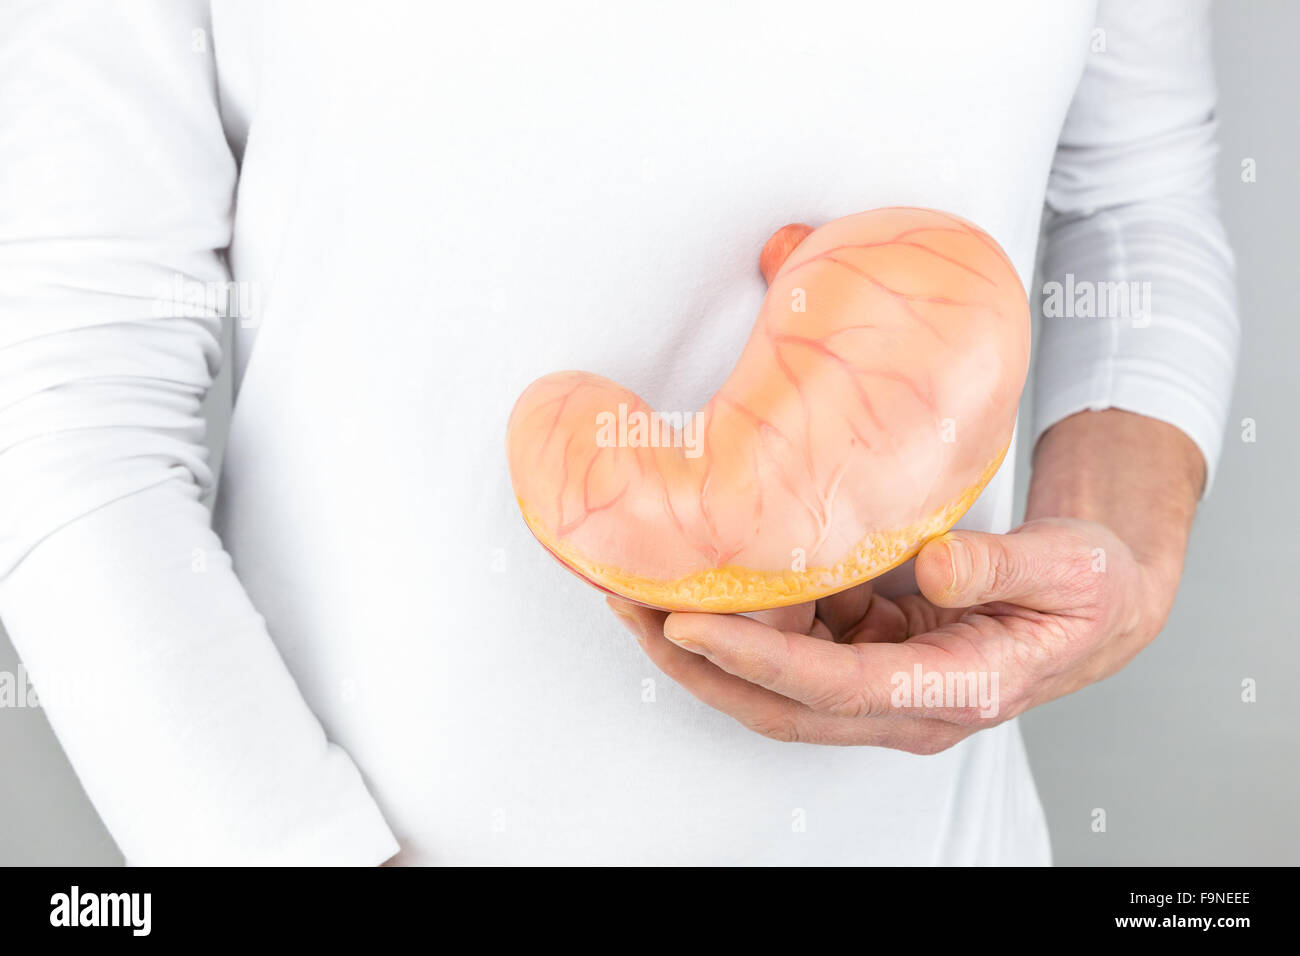 Female hand holding artificial model of human stomach isolated on white shirt Stock Photo